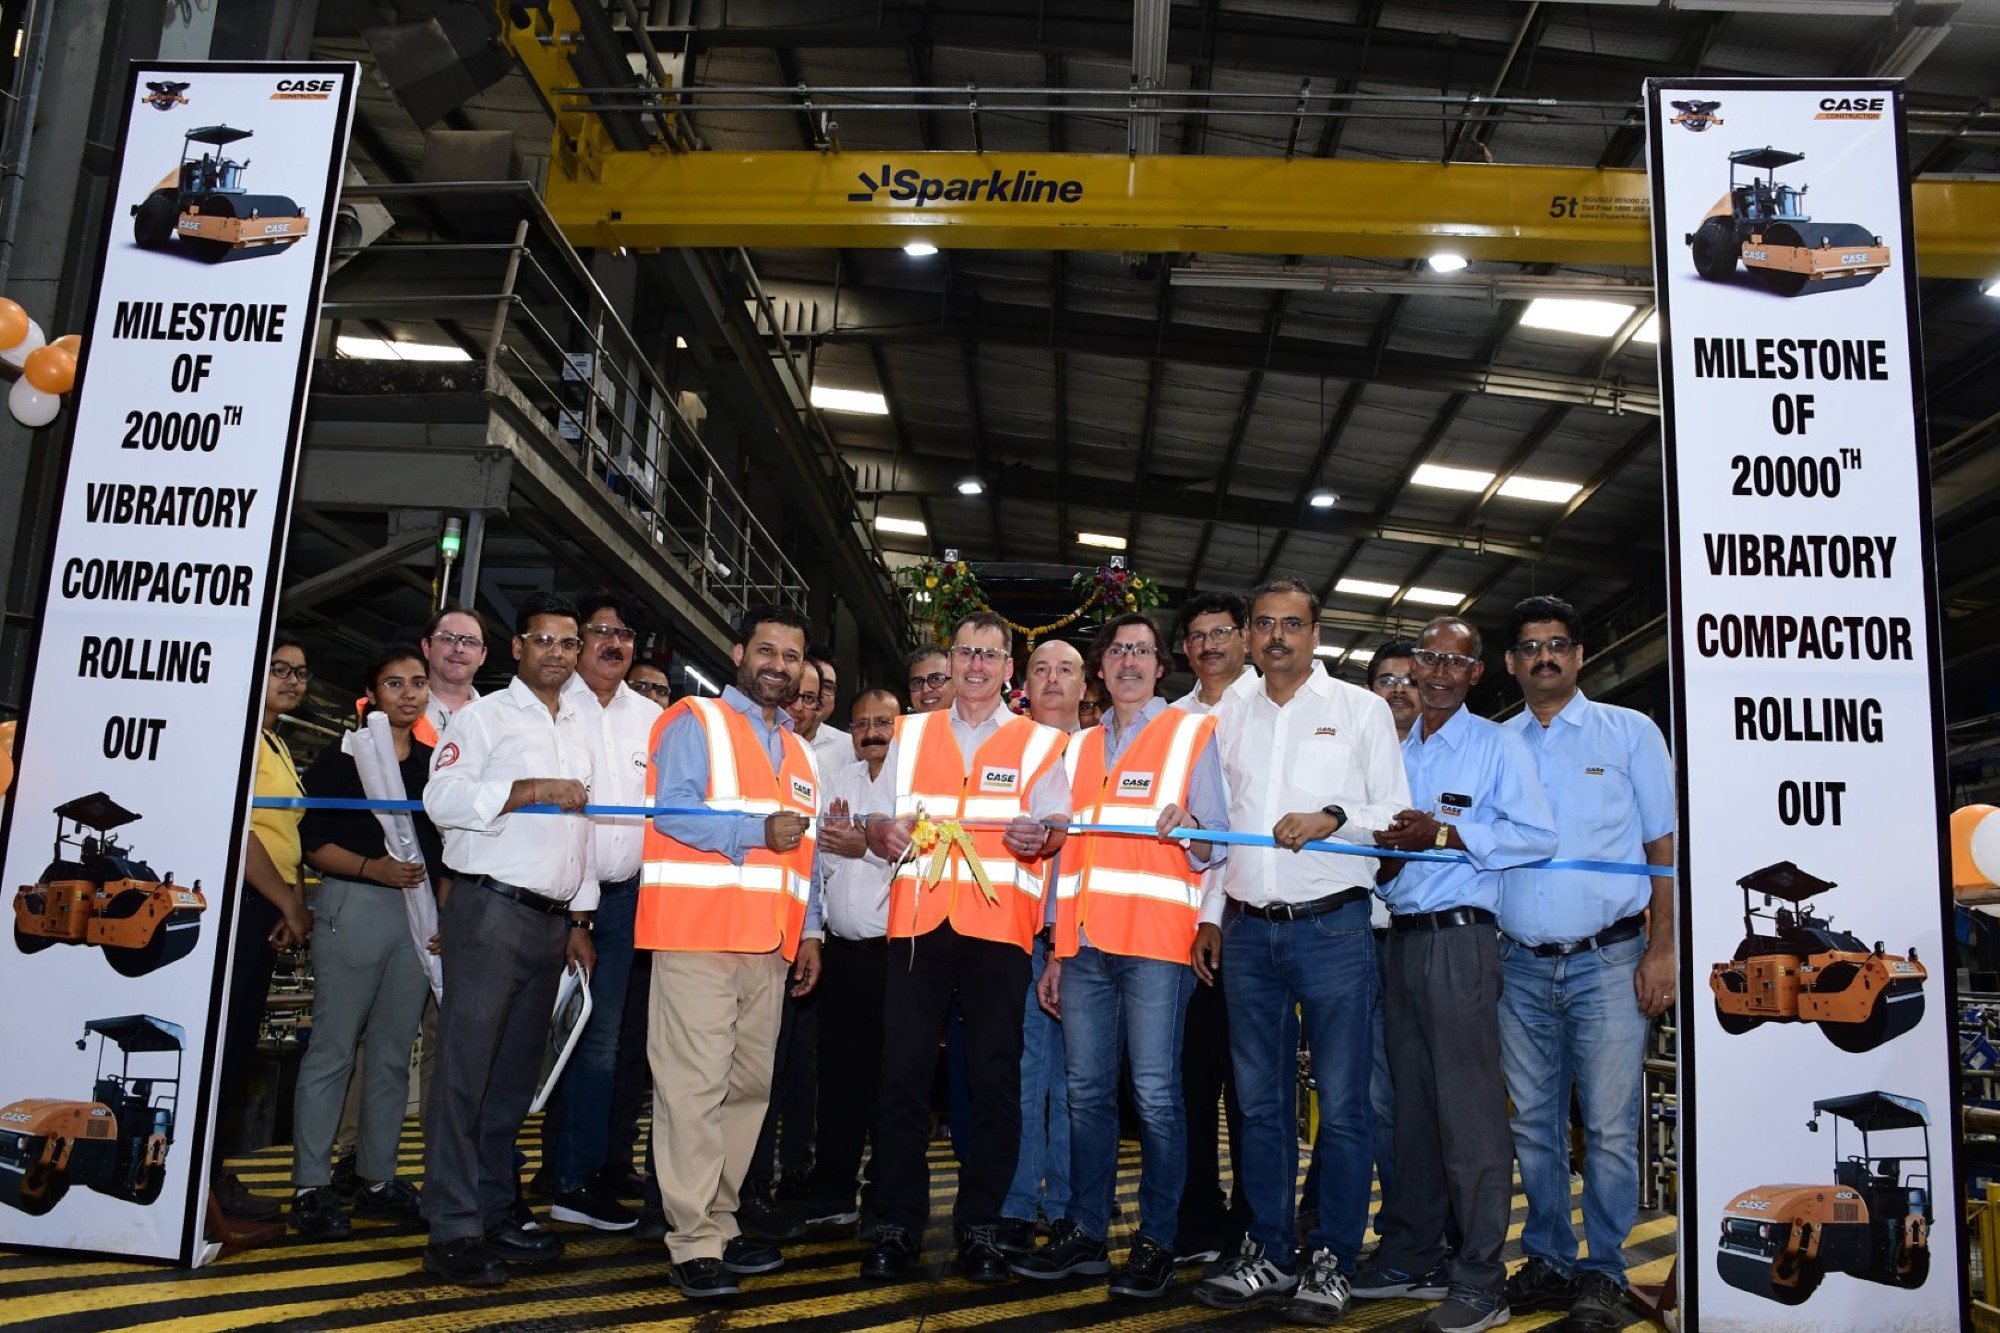 CASE India launches the 20,000th vibratory compactor